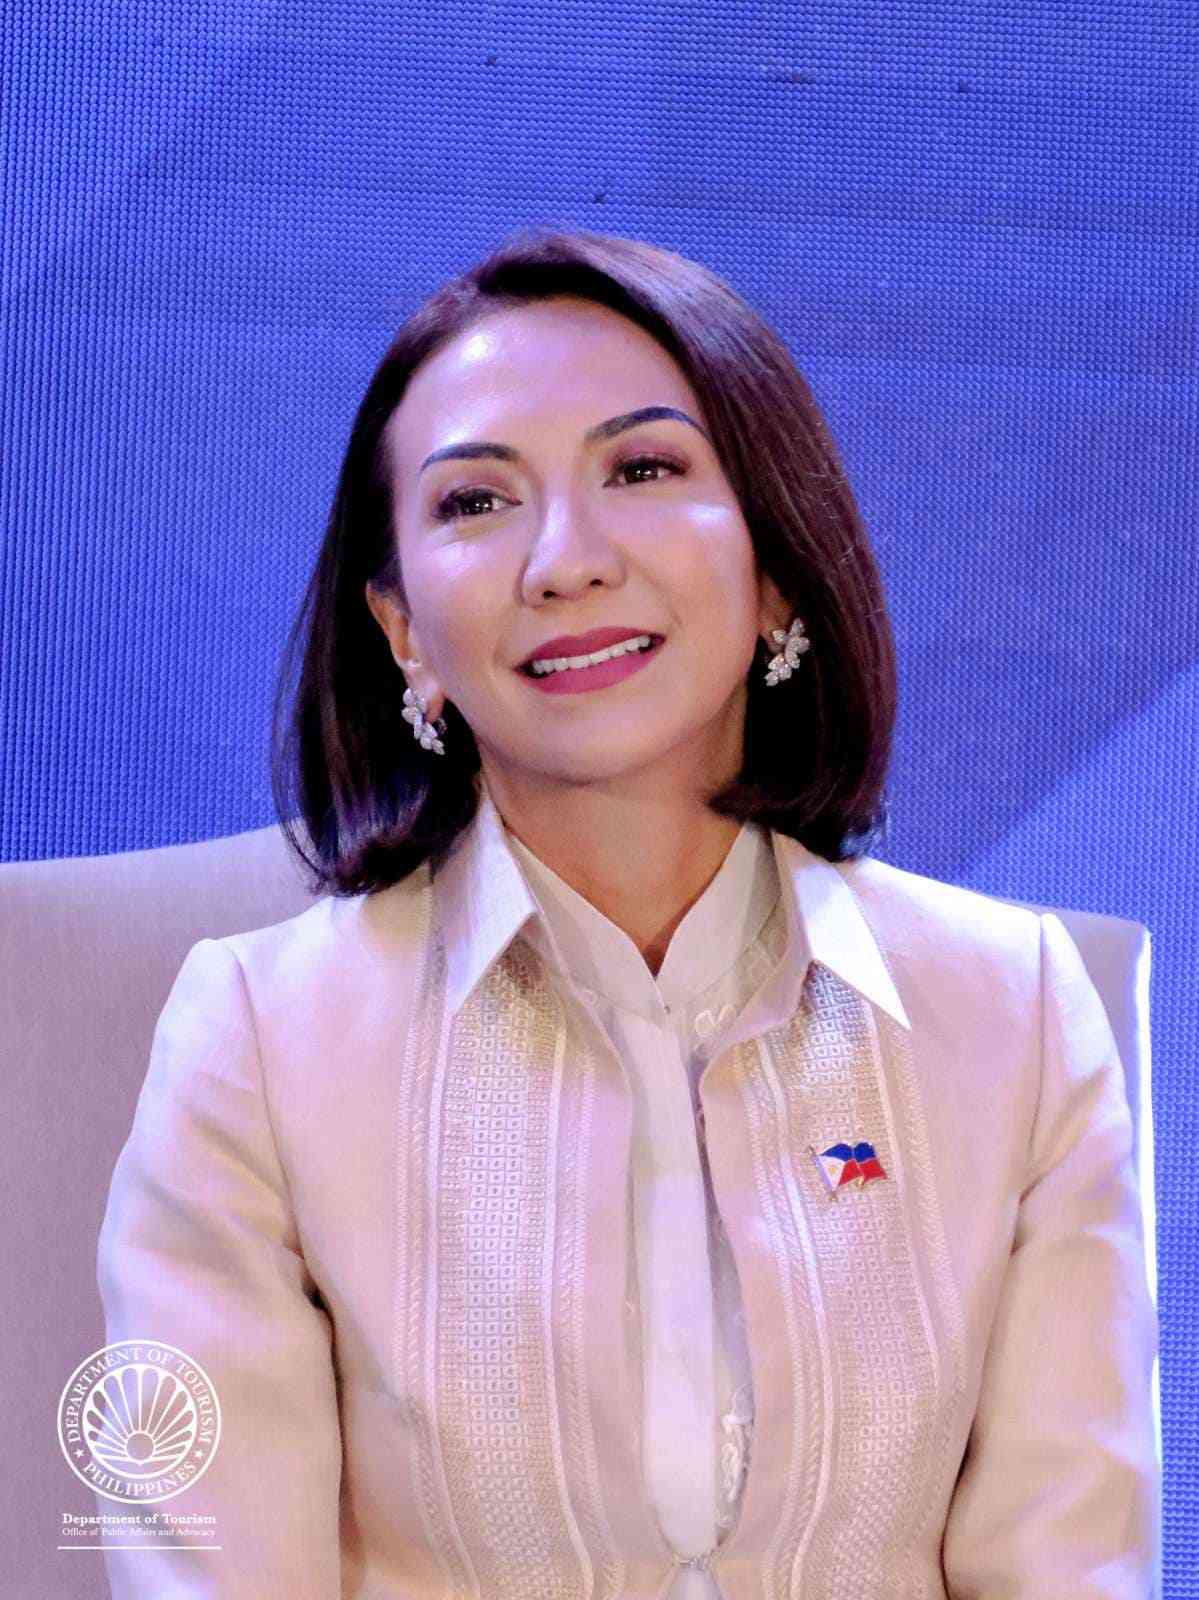 DOT affirms support for peace and security efforts under Marcos administration – Sec. Frasco